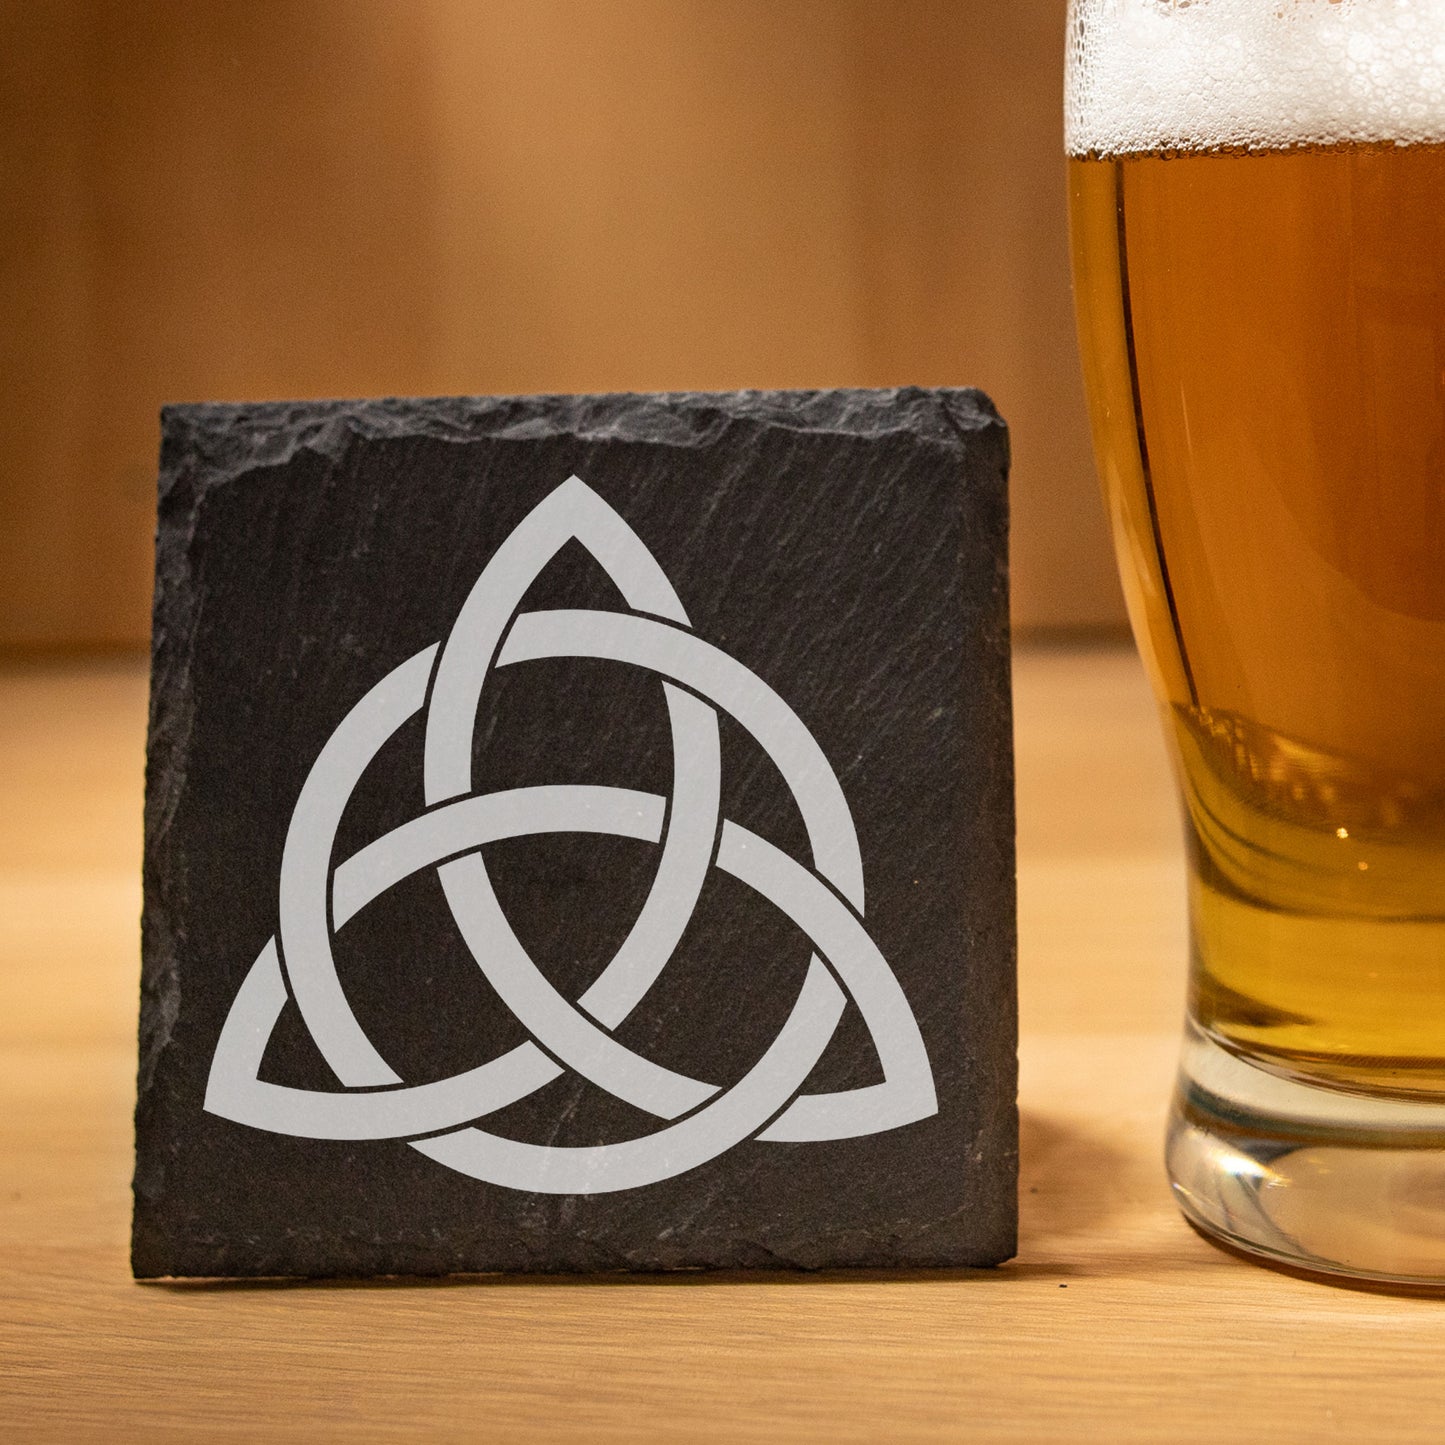 Celtic Knot Engraved Beer Pint Glass and/or Coaster Set  - Always Looking Good - Square Coaster Only  